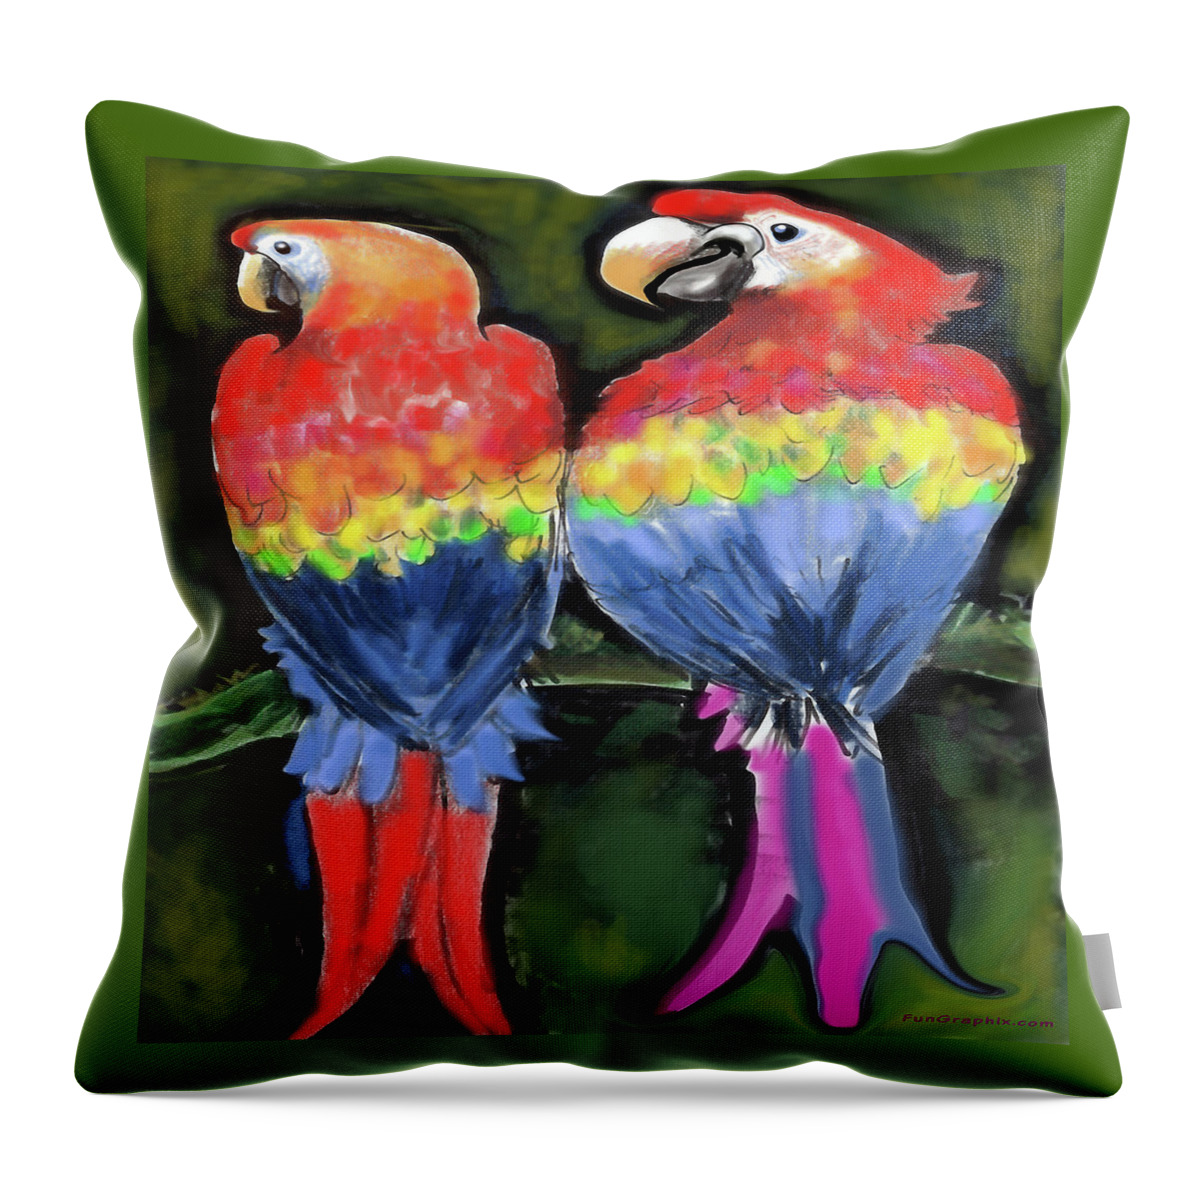 Parrot Throw Pillow featuring the painting Parrots by Kevin Middleton